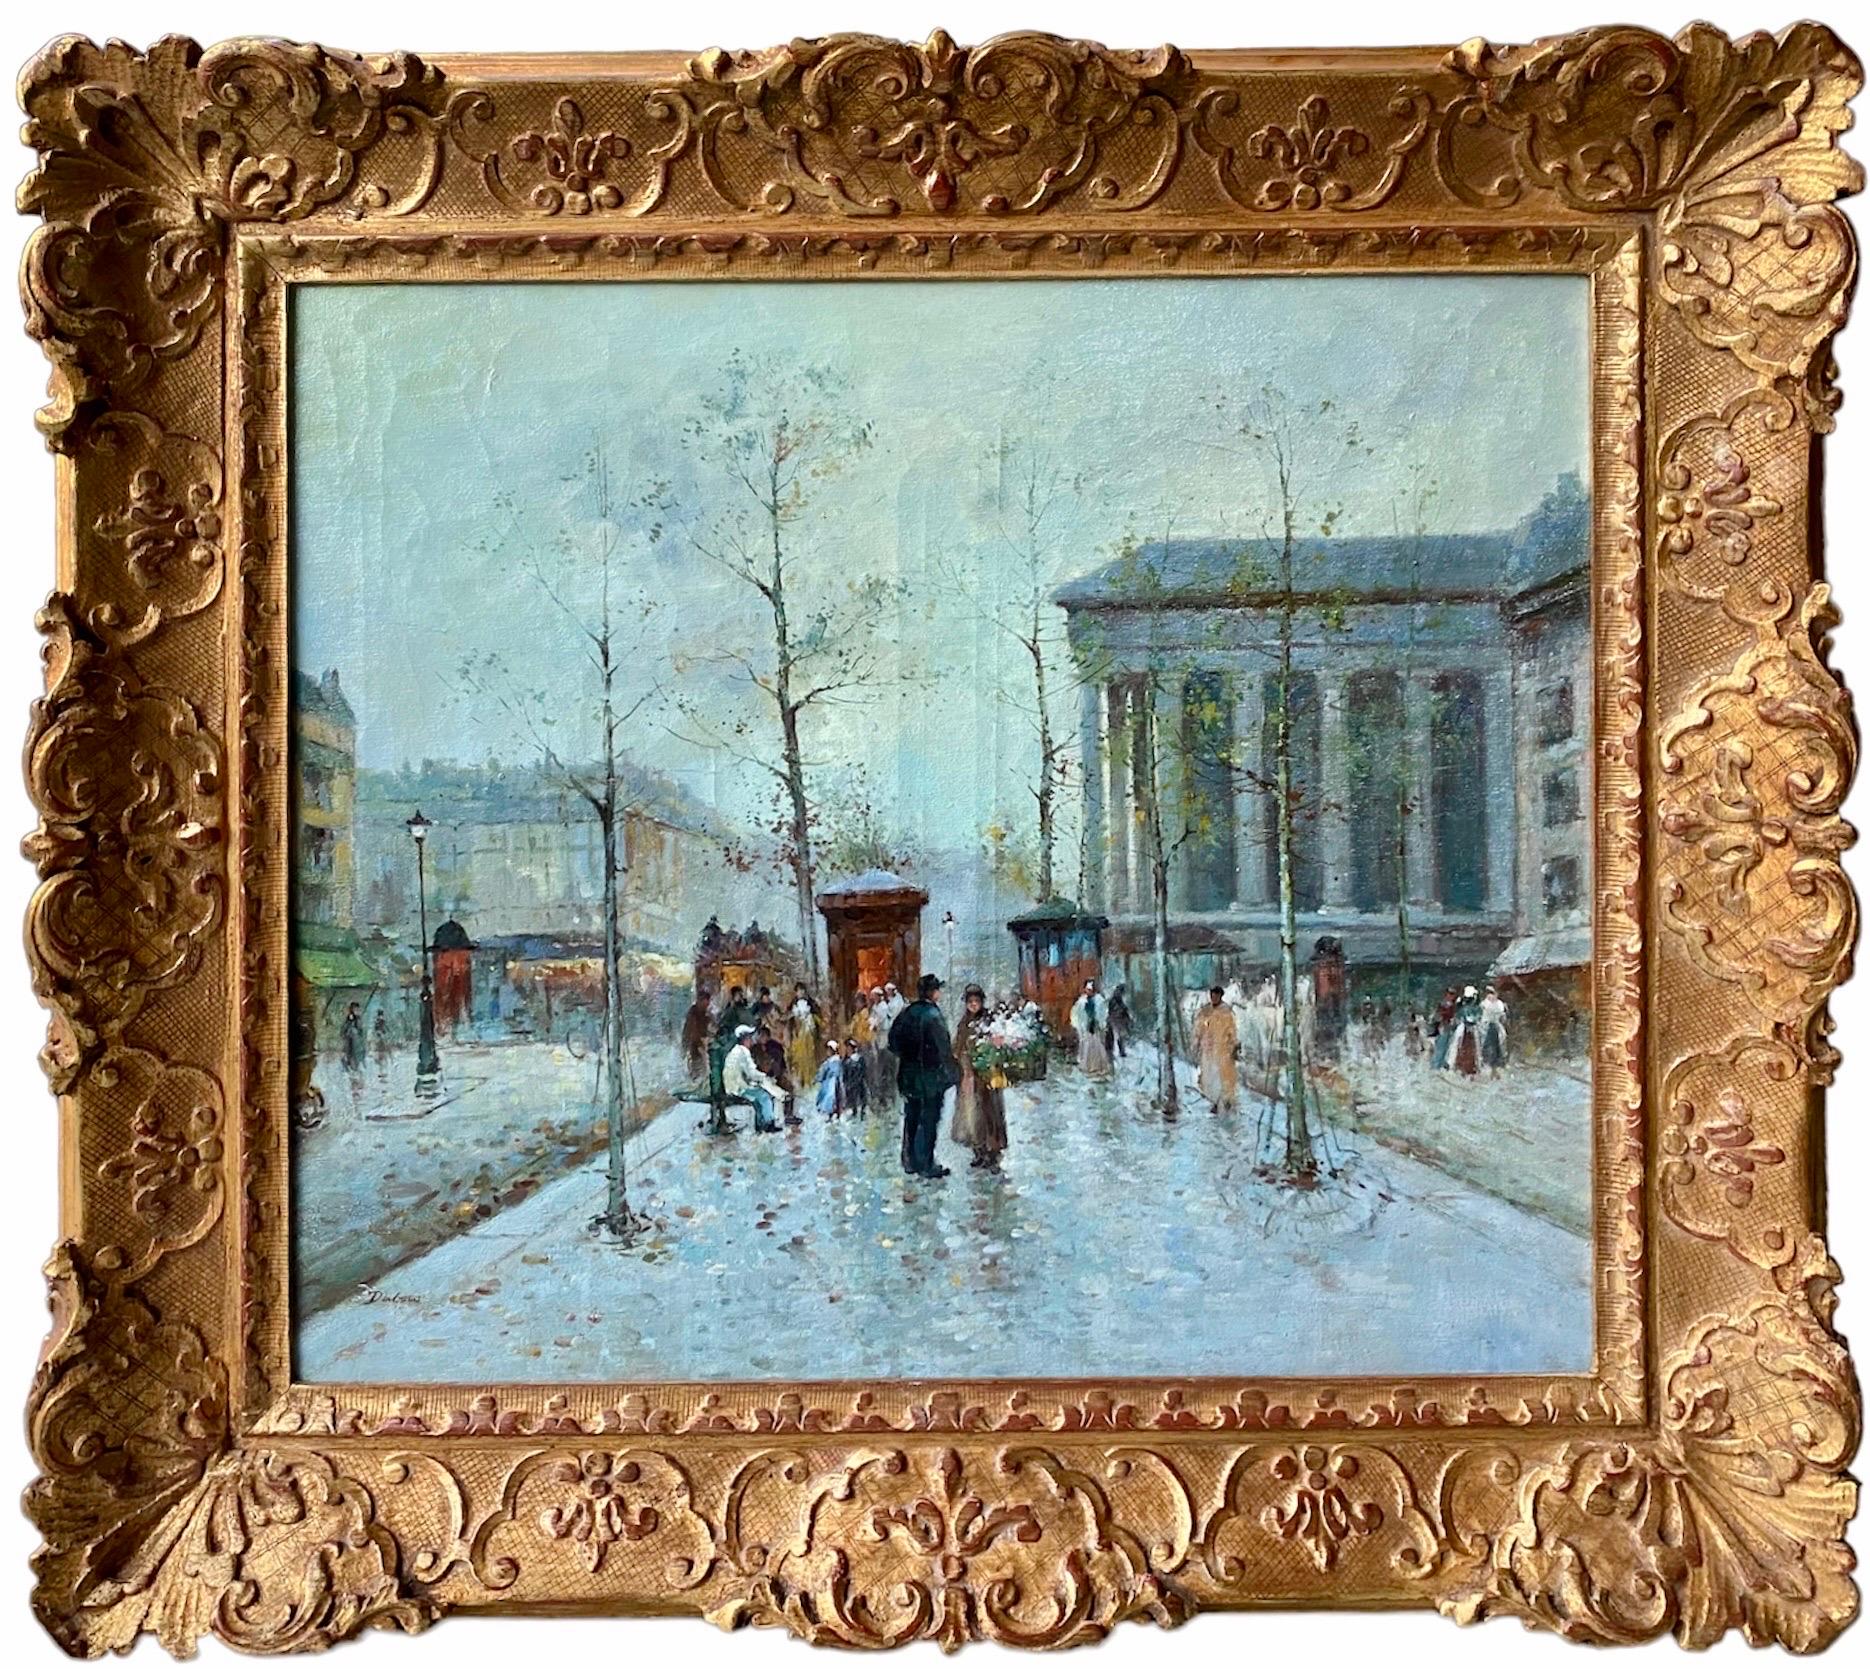 Unknown Figurative Painting - Large 19th century style French impressionist cityscape - Flower market Paris